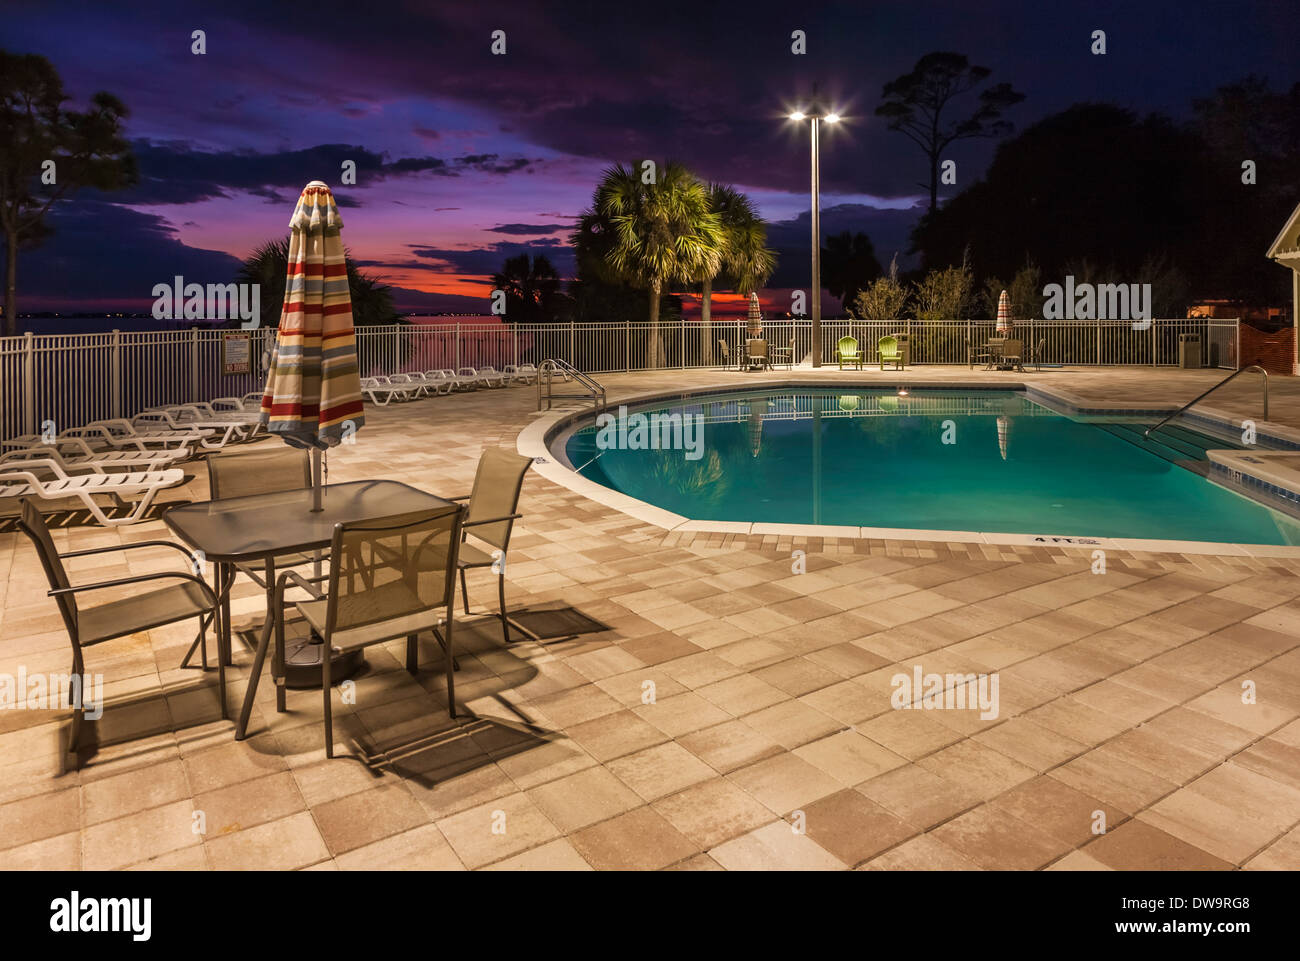 Outdoor swimming pool with concrete tile deck at sunset in Navarre, Florida Stock Photo